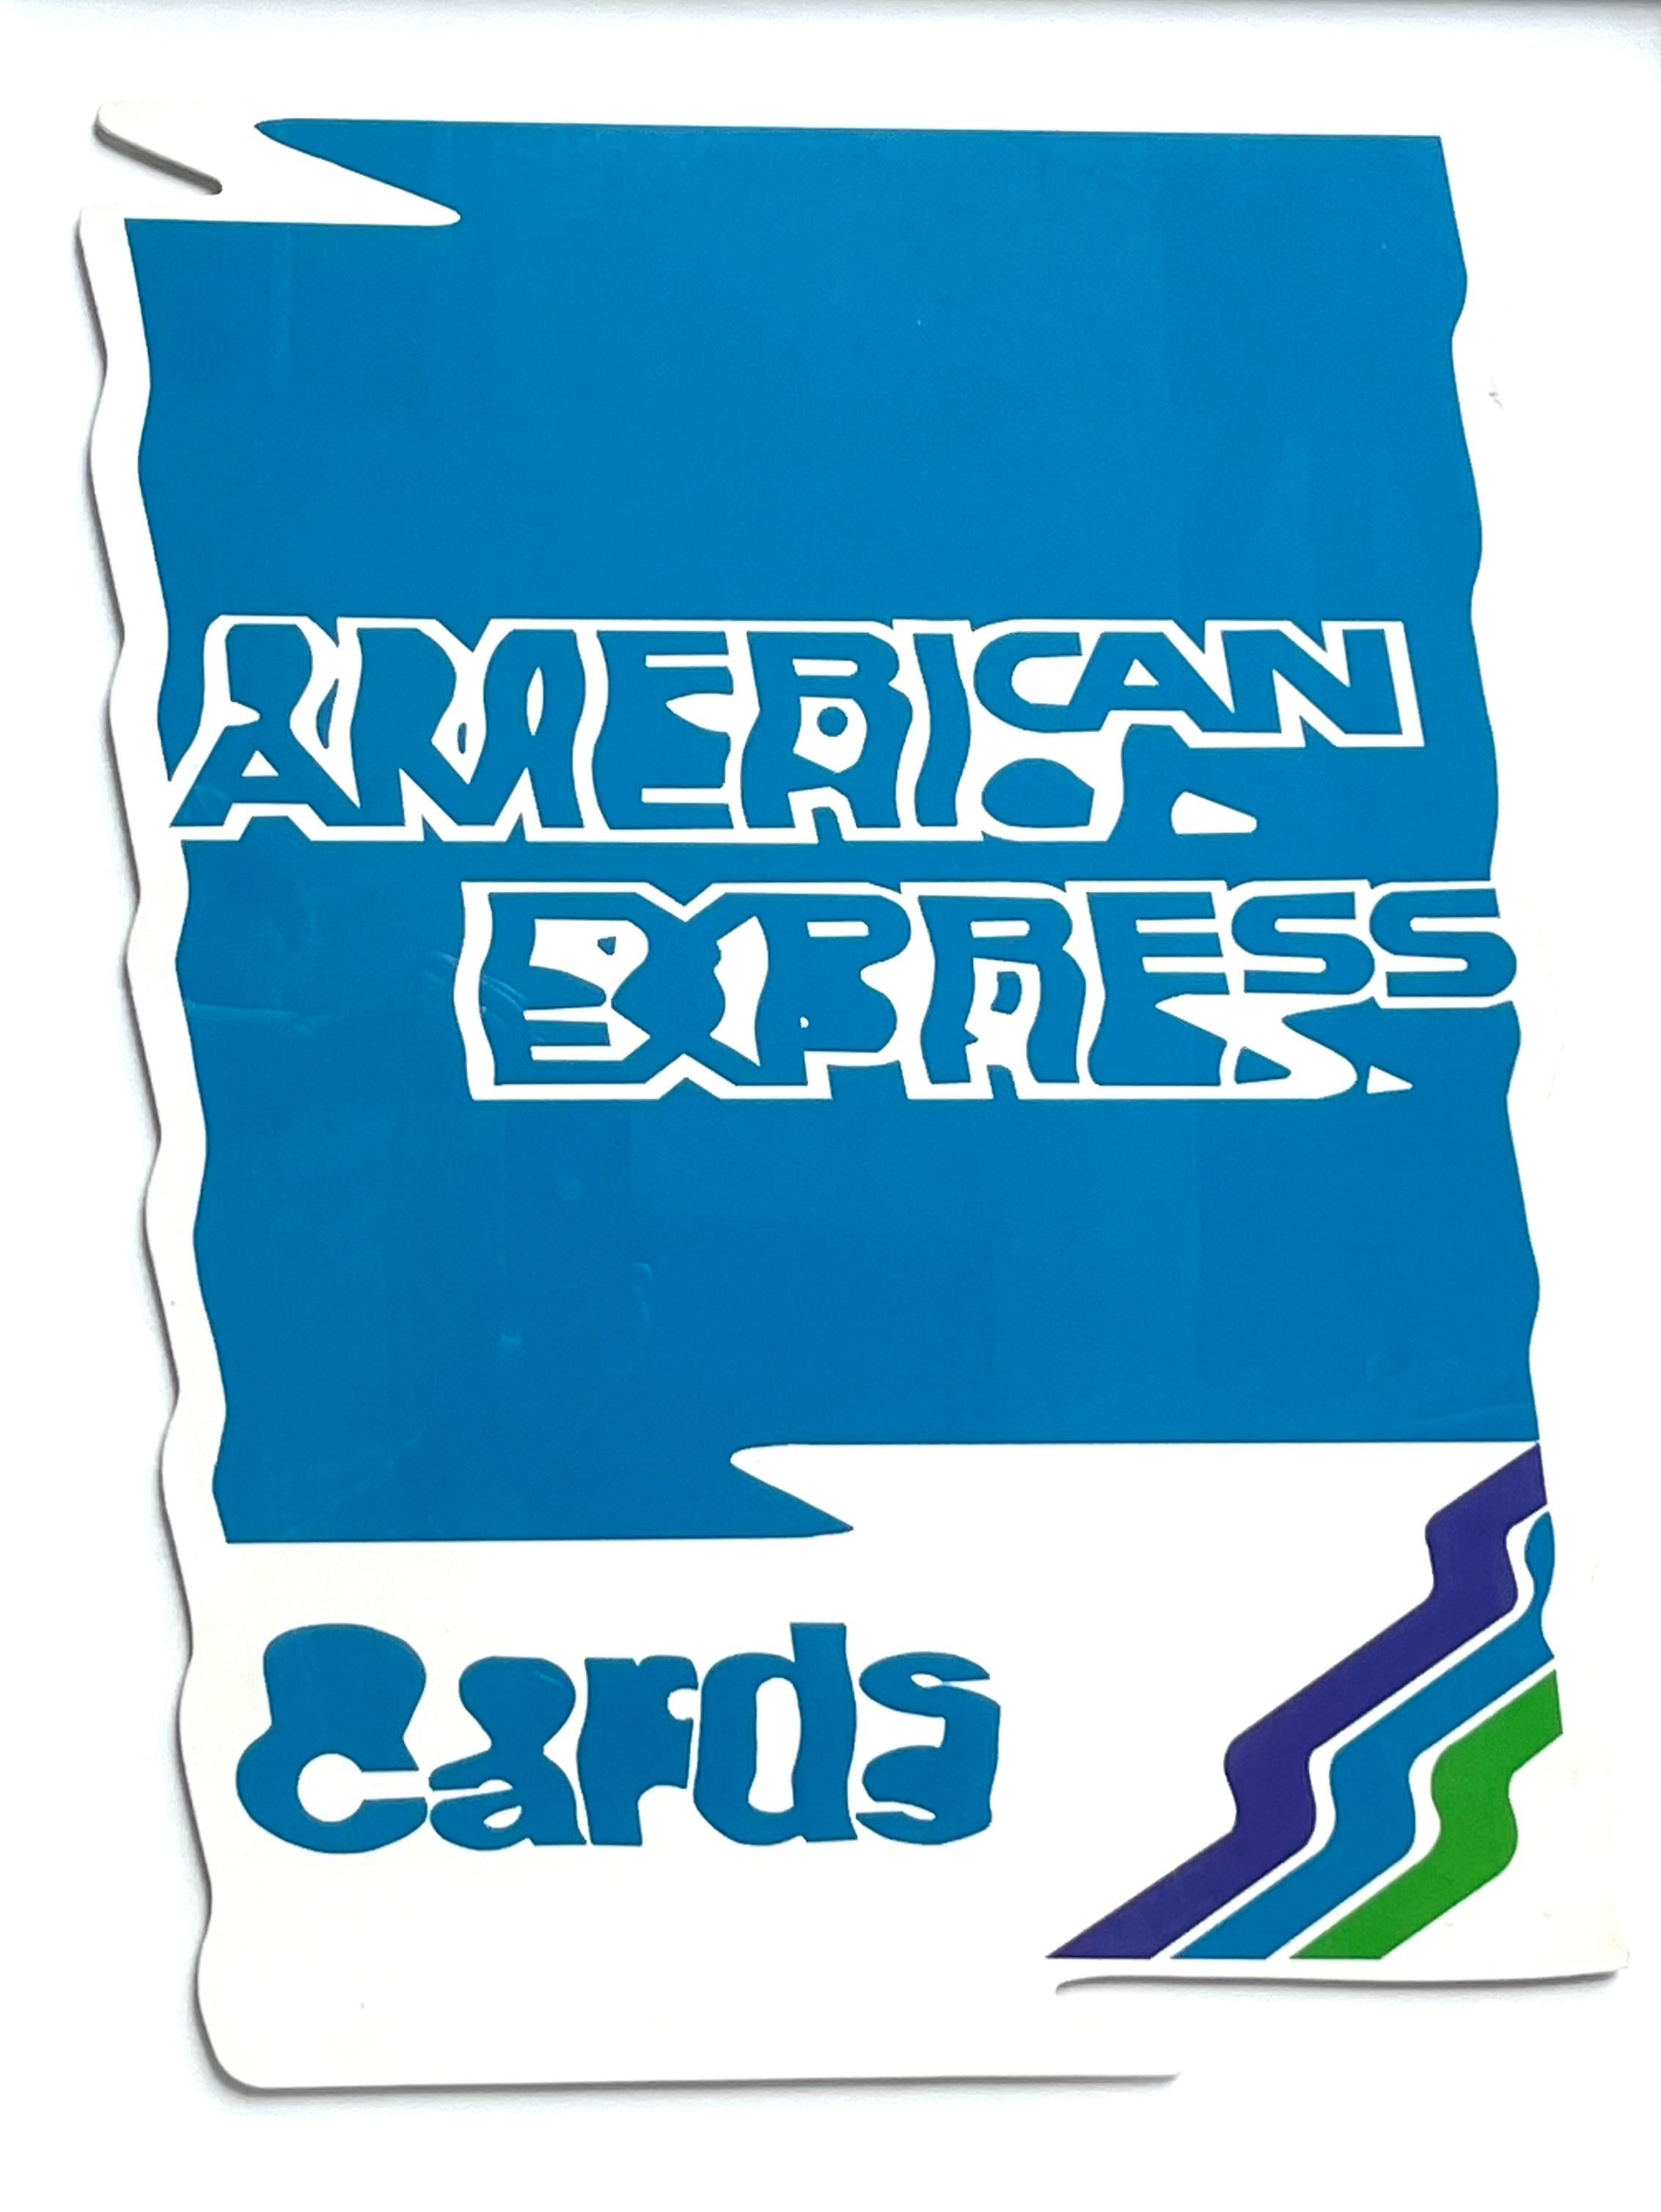 Raymond Hains Figurative Print - RAYMOND HAINS : American Express, 1990 - Color screenprint SIGNED and Numbered